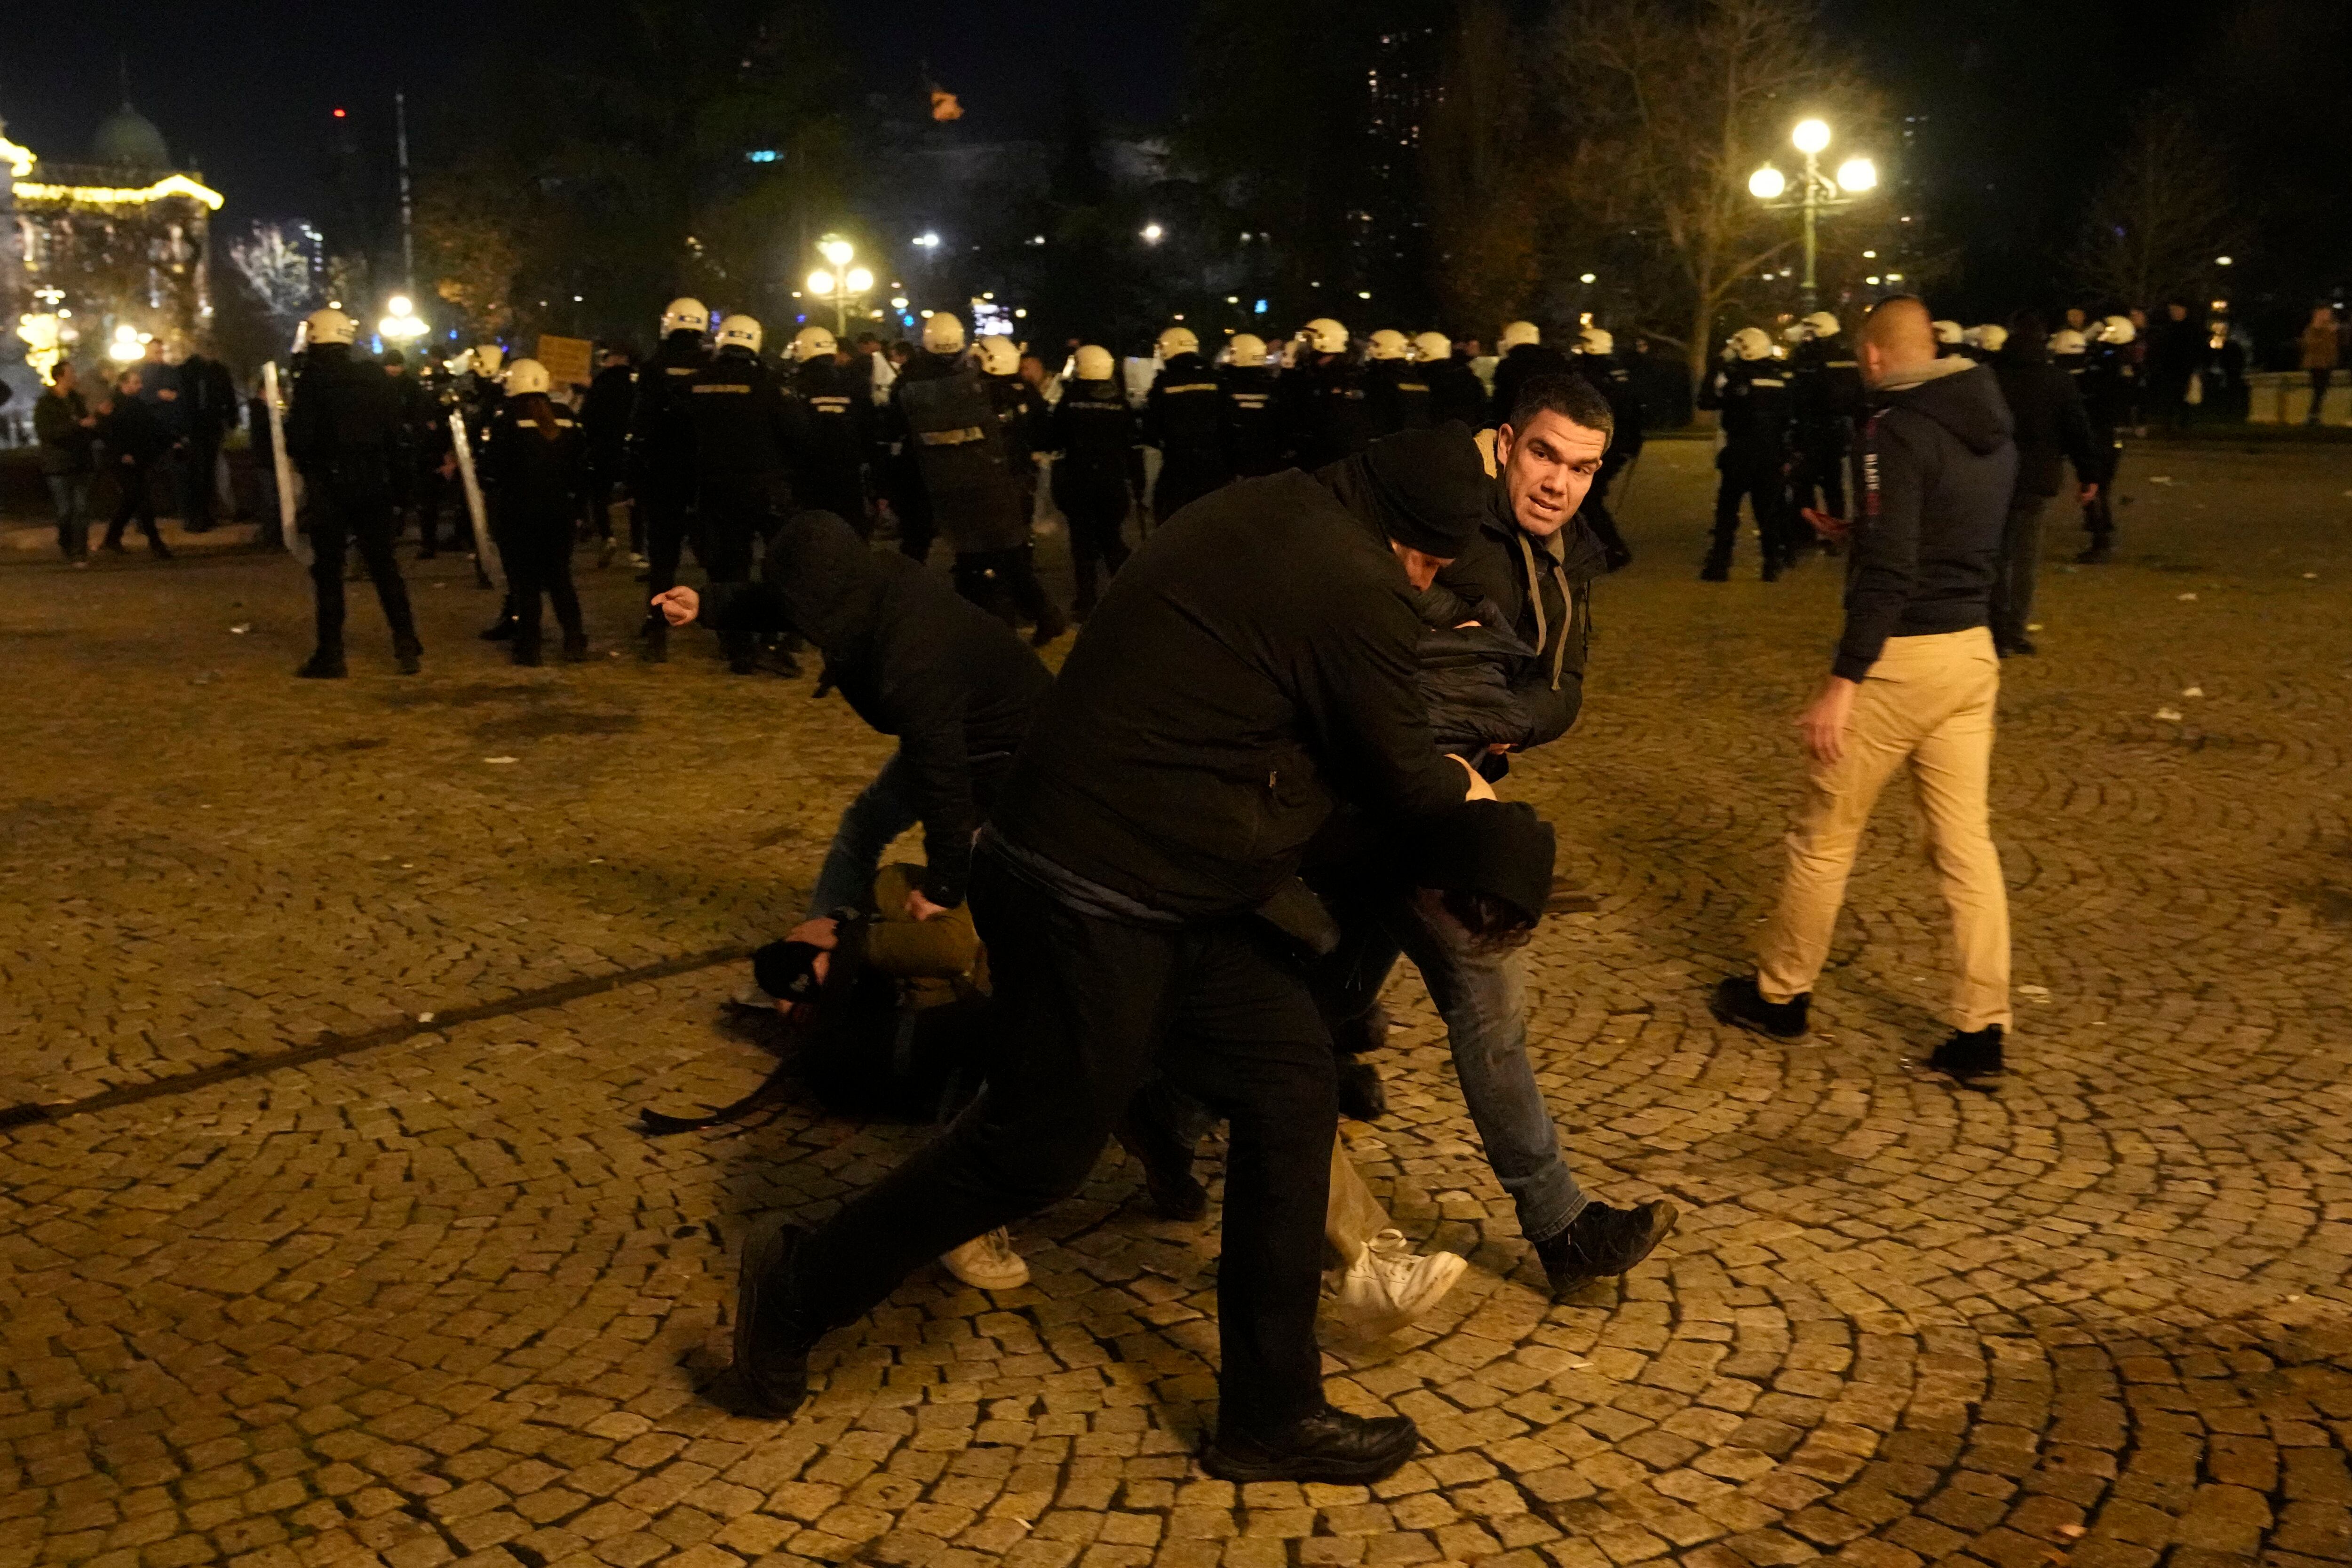 Serbian police fire tear gas at protesters threatening to storm city hall